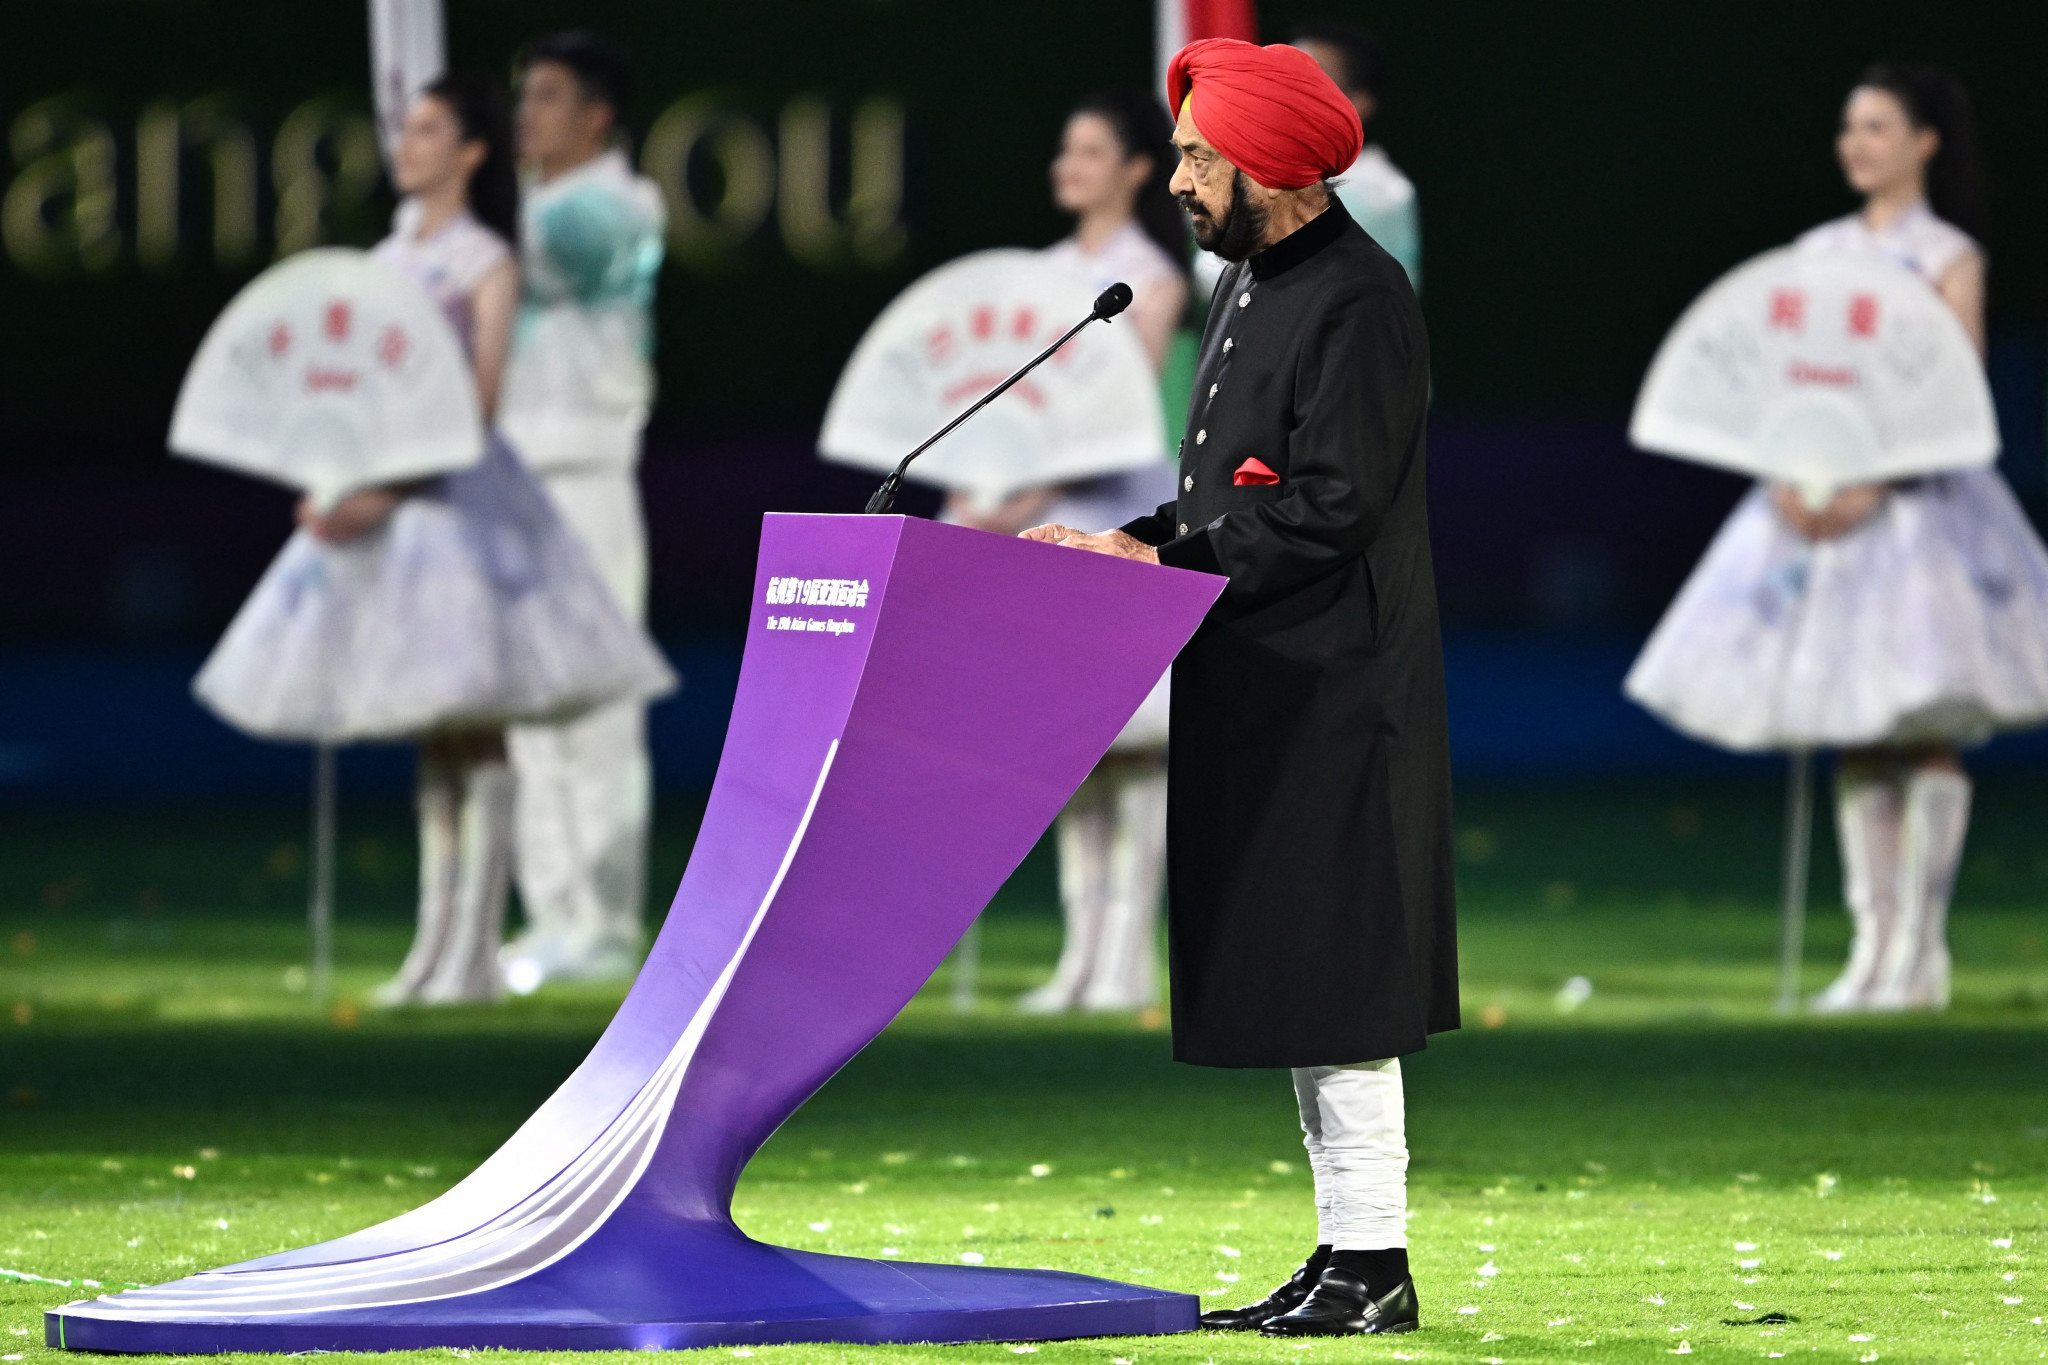 OCA Acting President Randhir Singh said the "world now knows Hangzhou" after staging the biggest Asian Games on record ©Getty Images